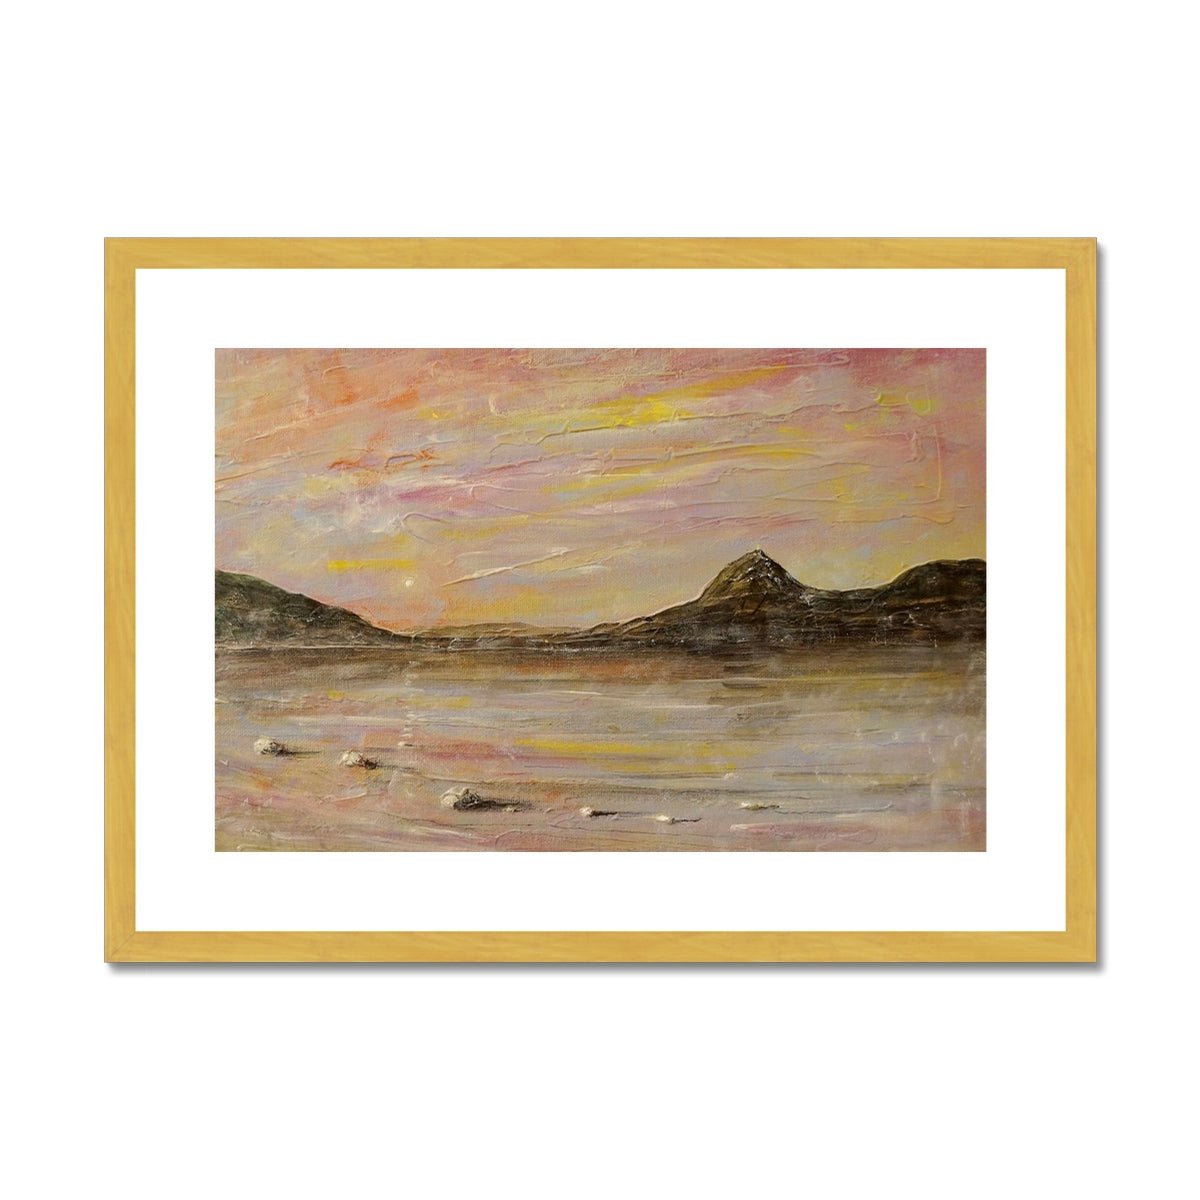 Loch Rannoch Dawn Painting | Antique Framed & Mounted Prints From Scotland-Antique Framed & Mounted Prints-Scottish Lochs & Mountains Art Gallery-A2 Landscape-Gold Frame-Paintings, Prints, Homeware, Art Gifts From Scotland By Scottish Artist Kevin Hunter